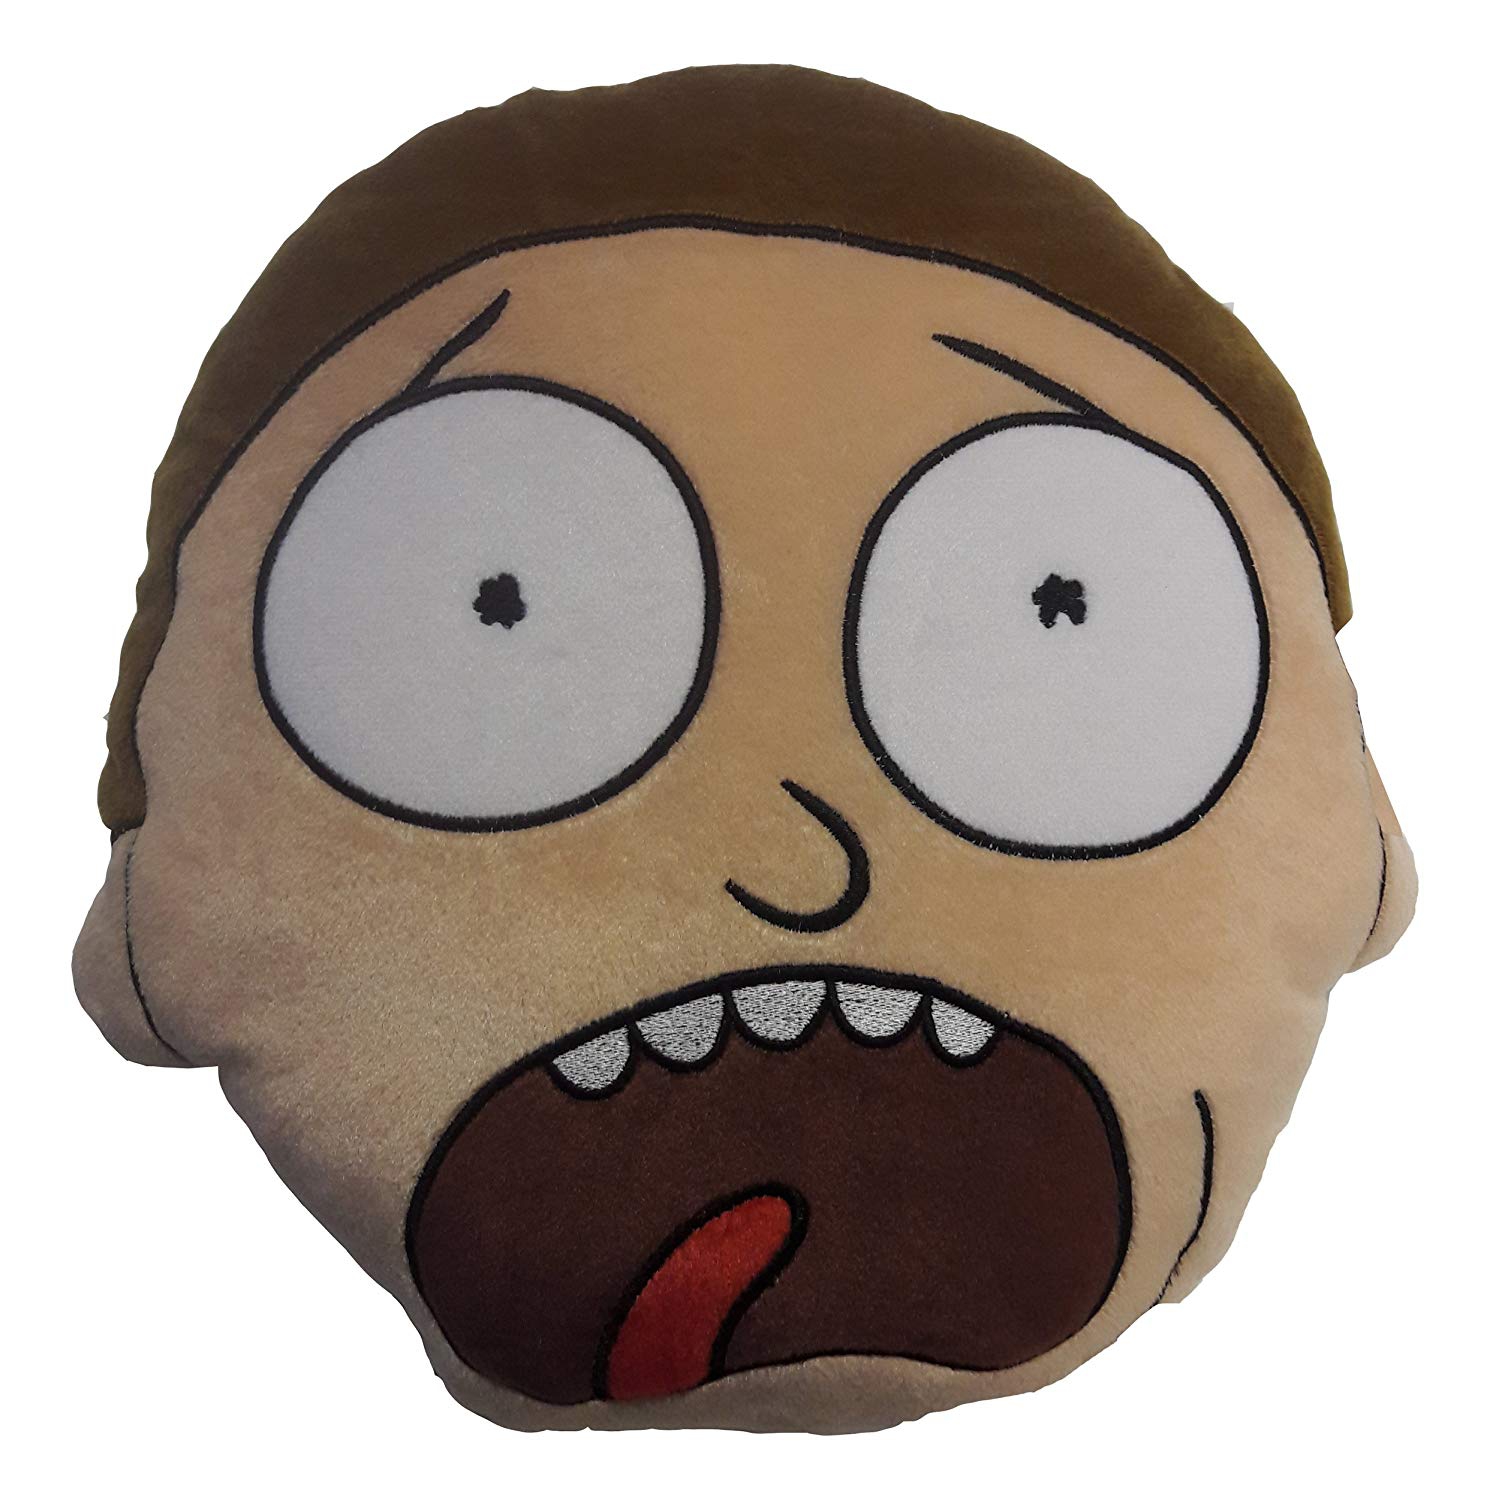 Rick and Morty Plush Embroidered Cushion